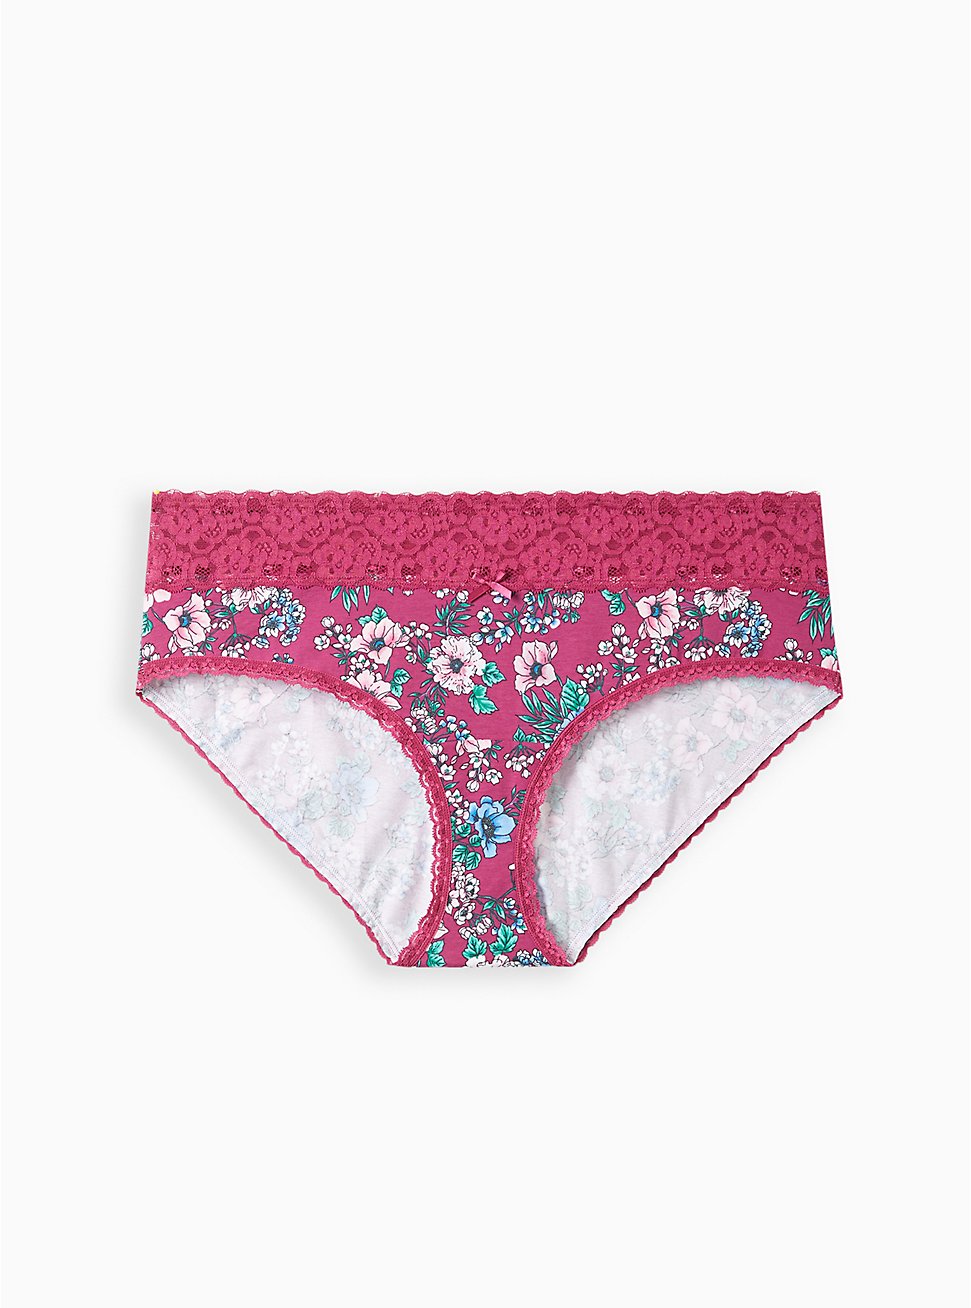 Cotton Mid-Rise Hipster Lace Trim Panty, STAND OUT FLORAL PURPLE, hi-res